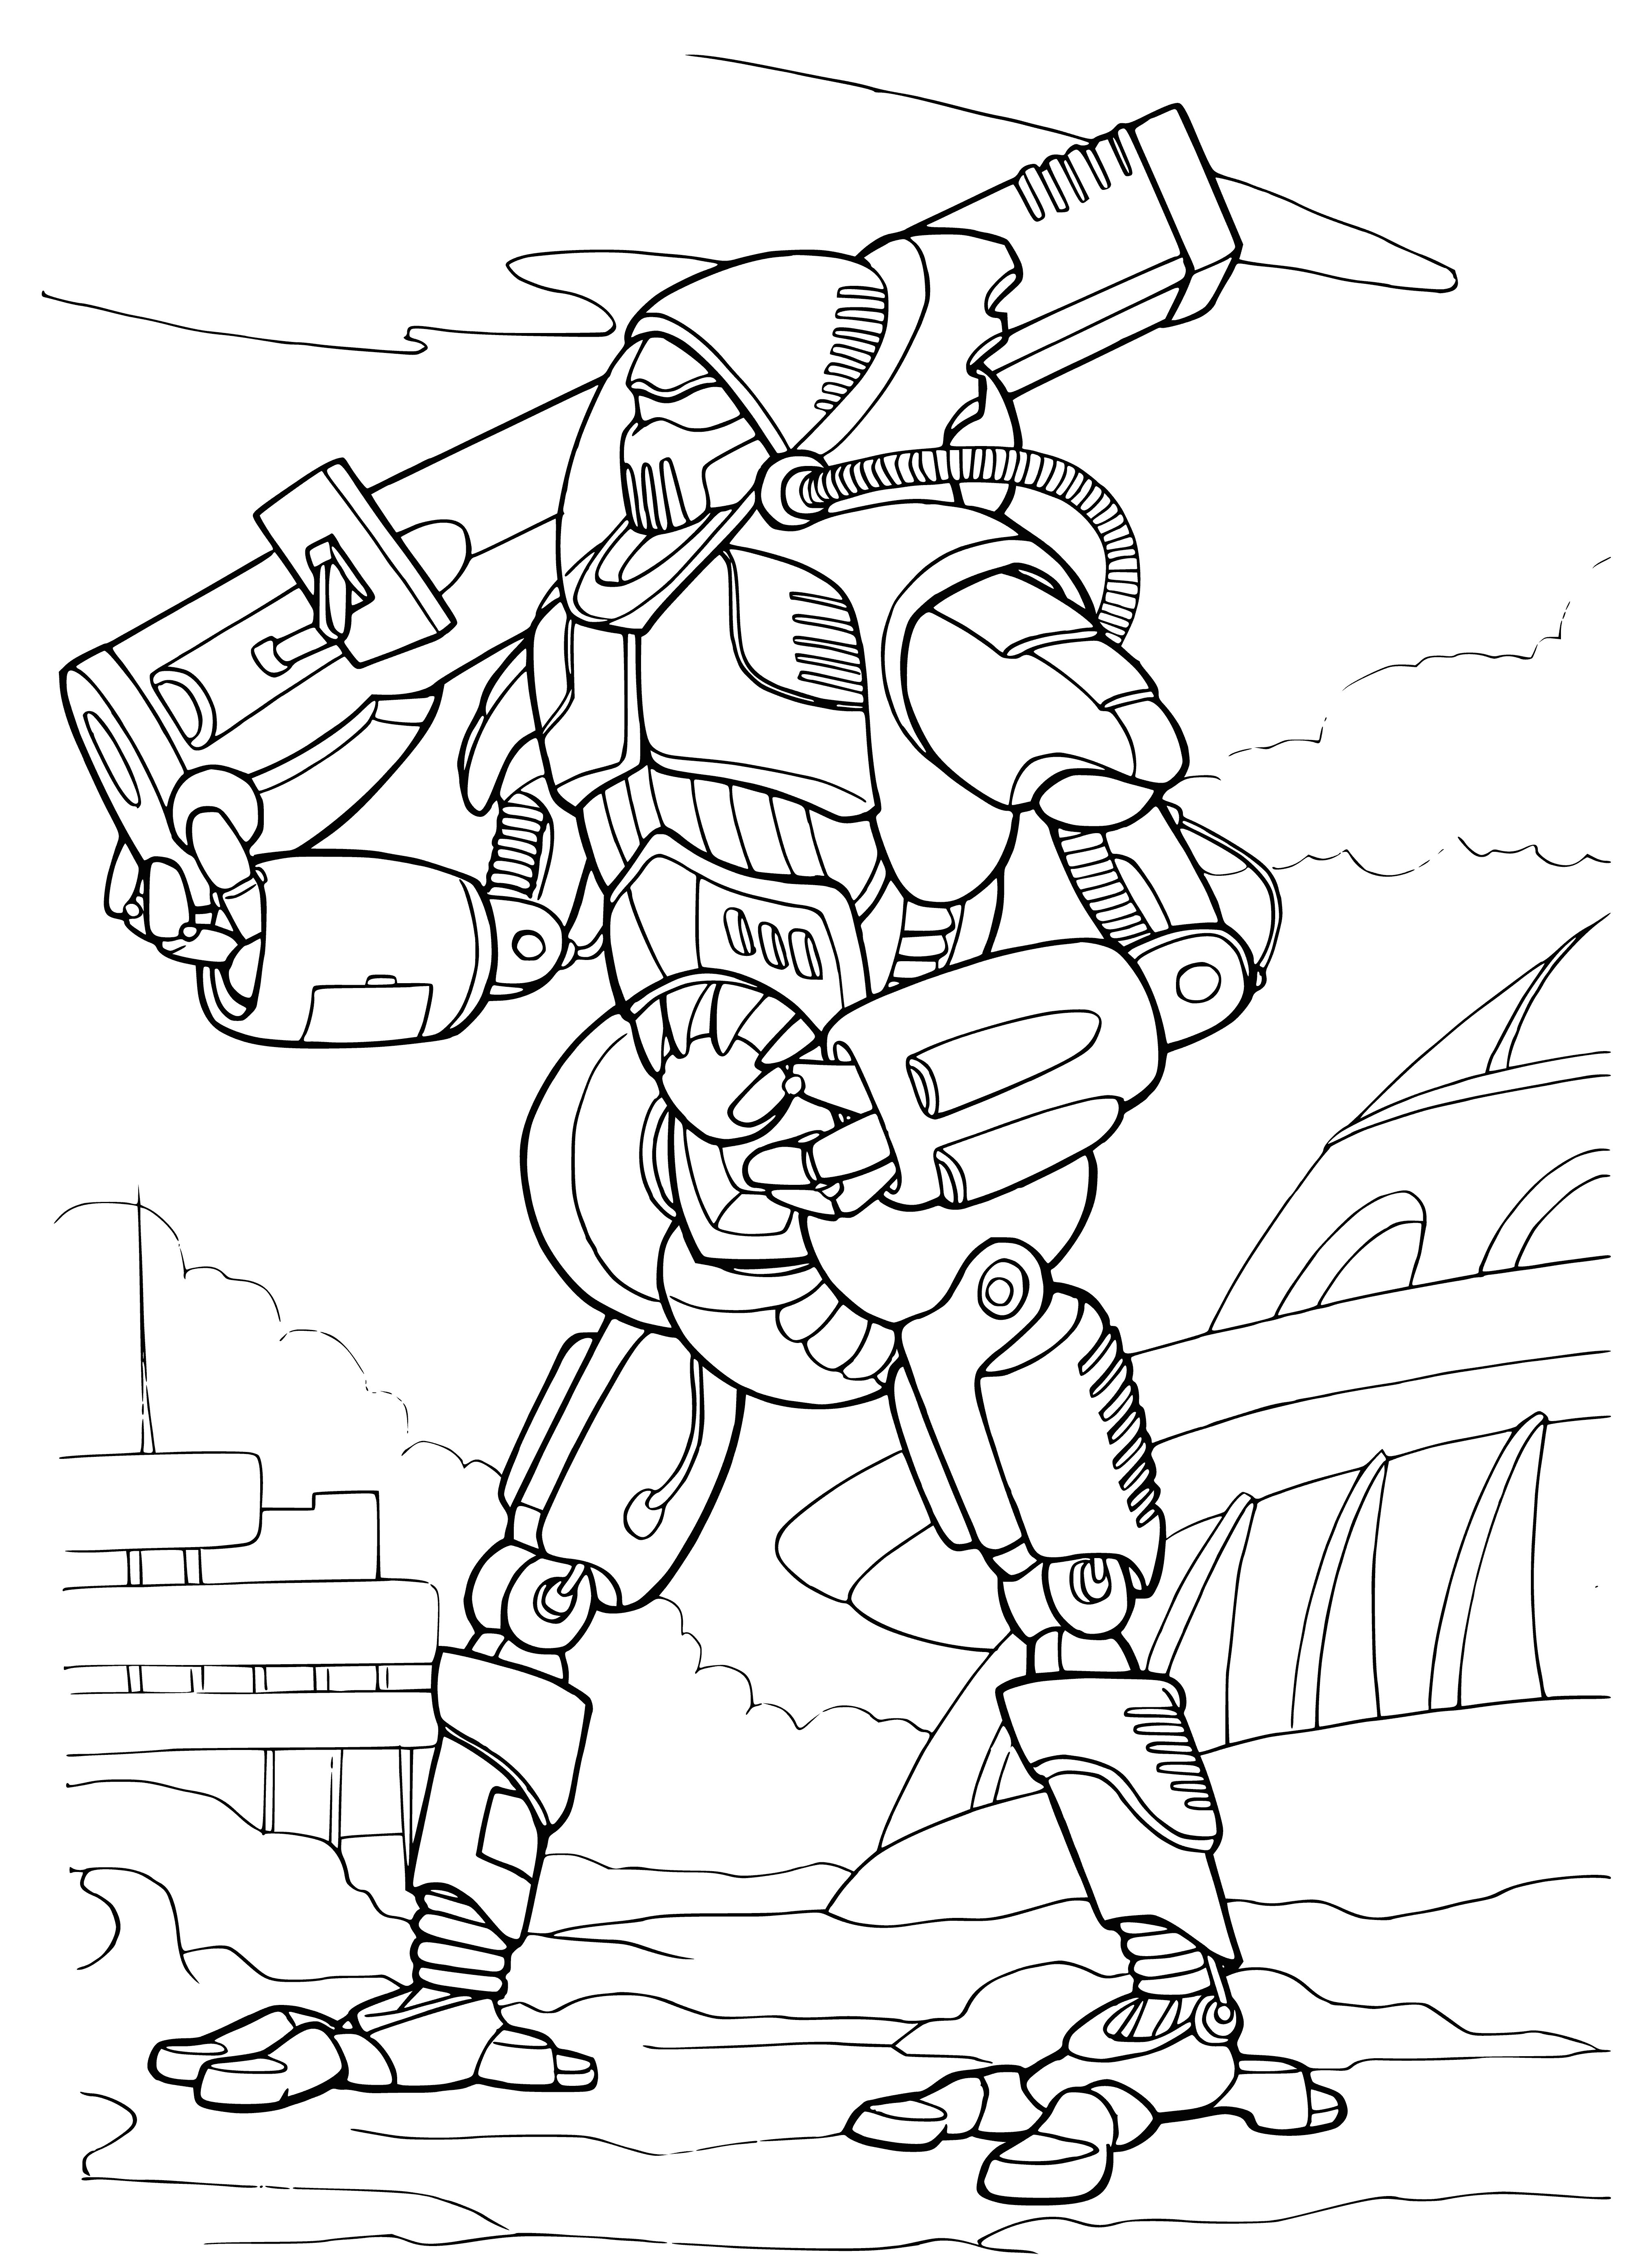 coloring page: Cyborgs with robotic parts and advanced weapons will fight destructive wars with no mercy.